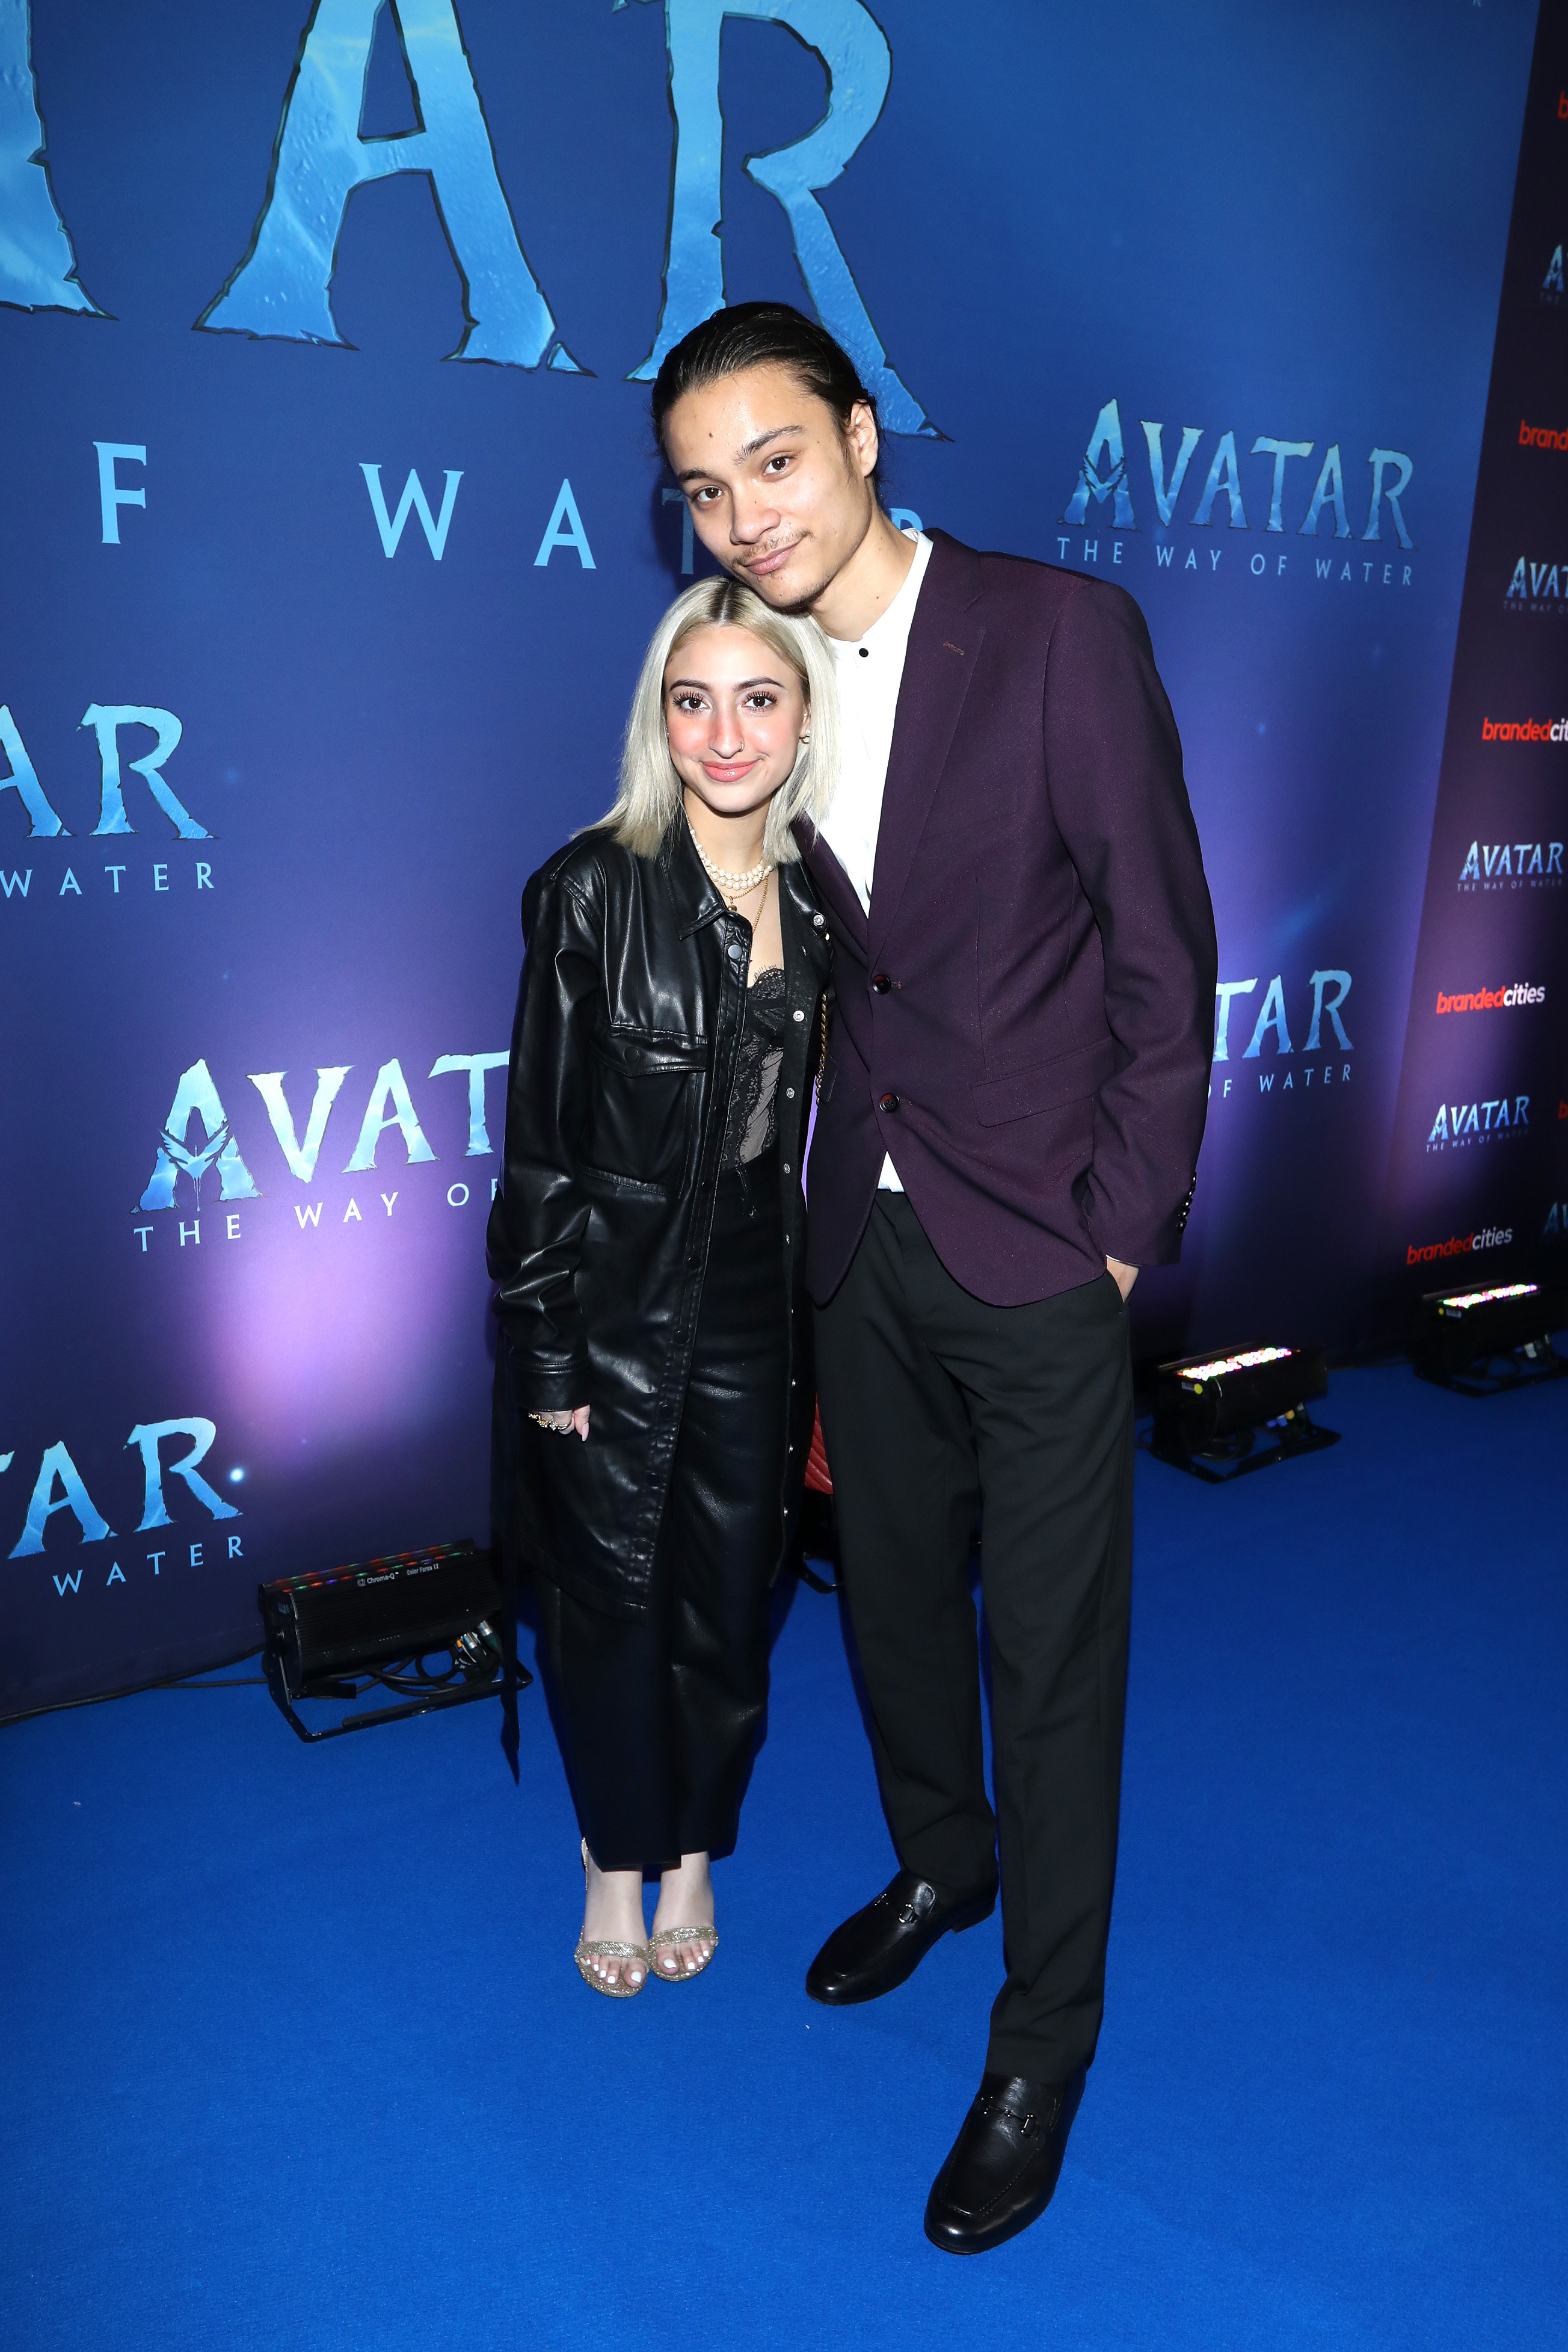 Filip Geljo on the blue carpet with a blonde woman